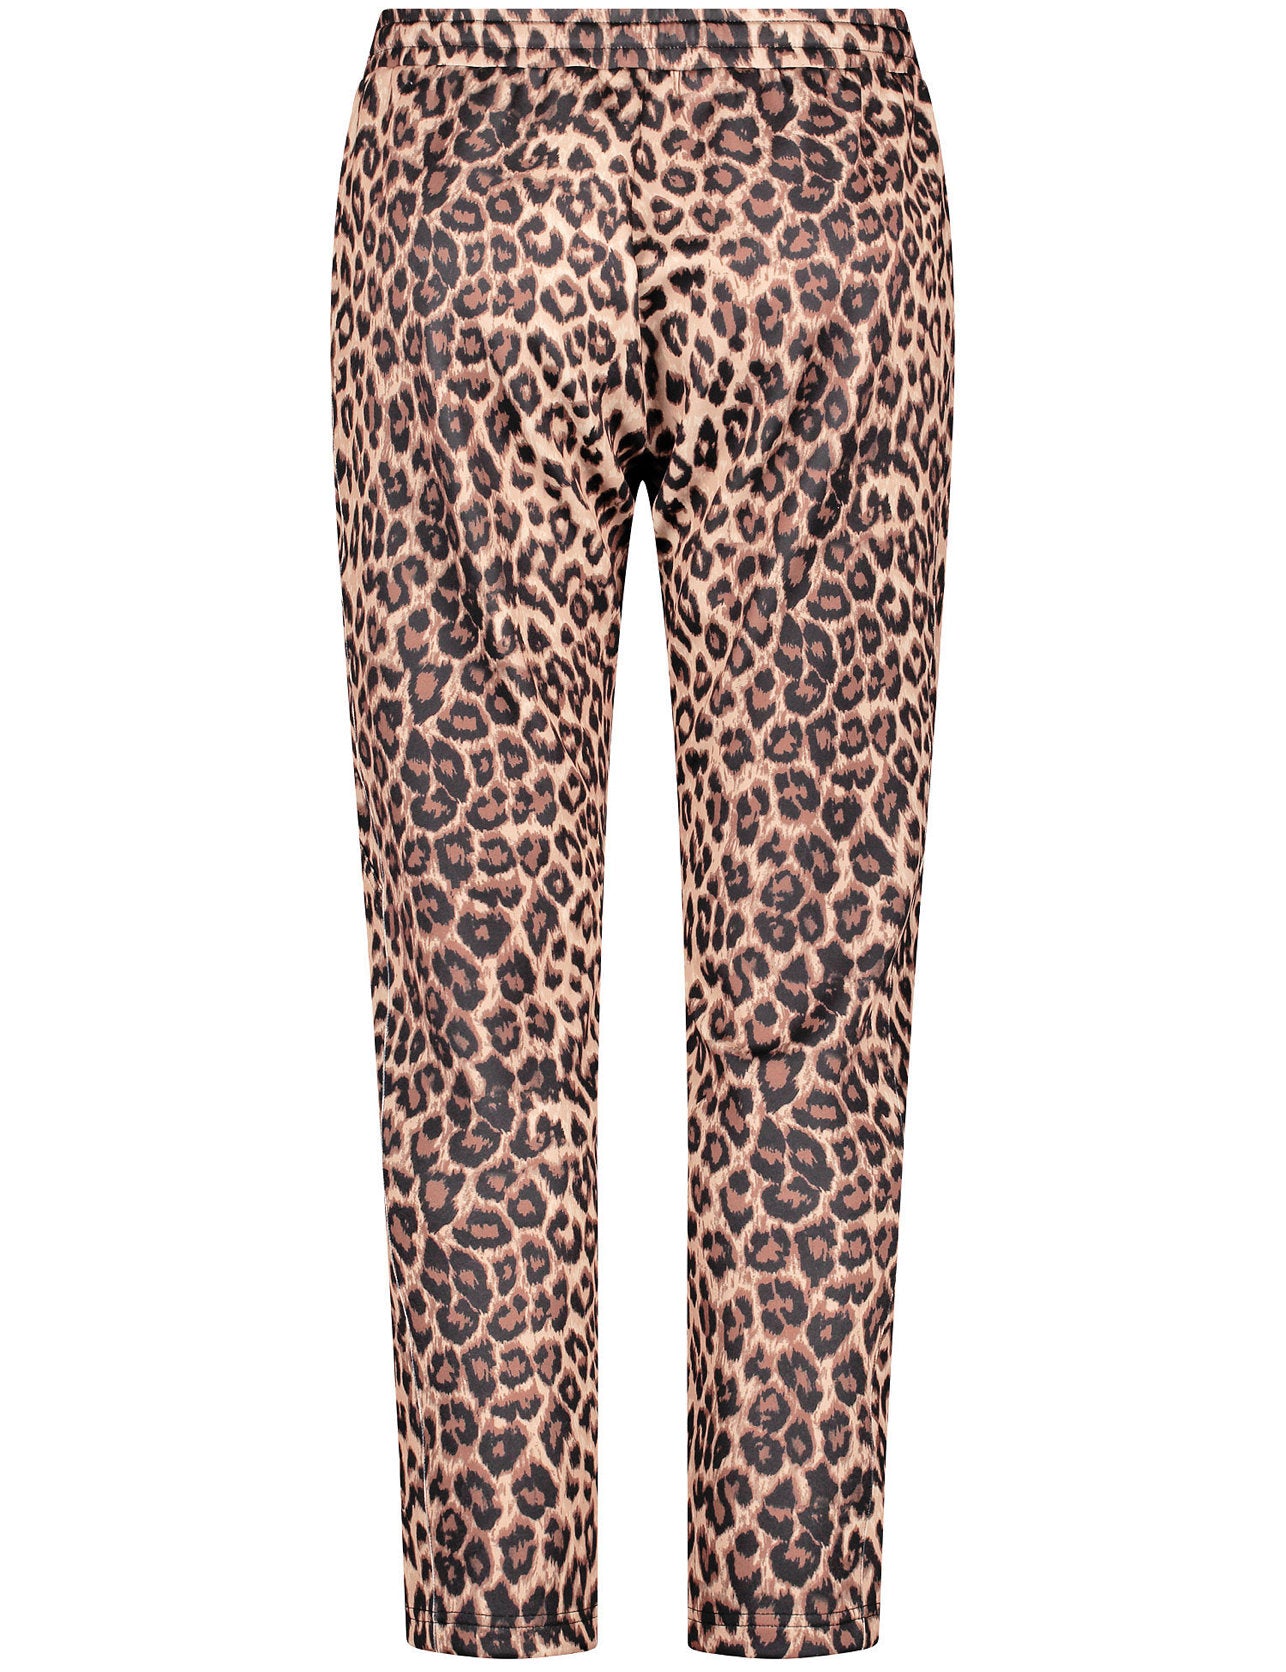 Tracksuit Bottoms With A Leopard Print Pattern_321203-26329_1102_03